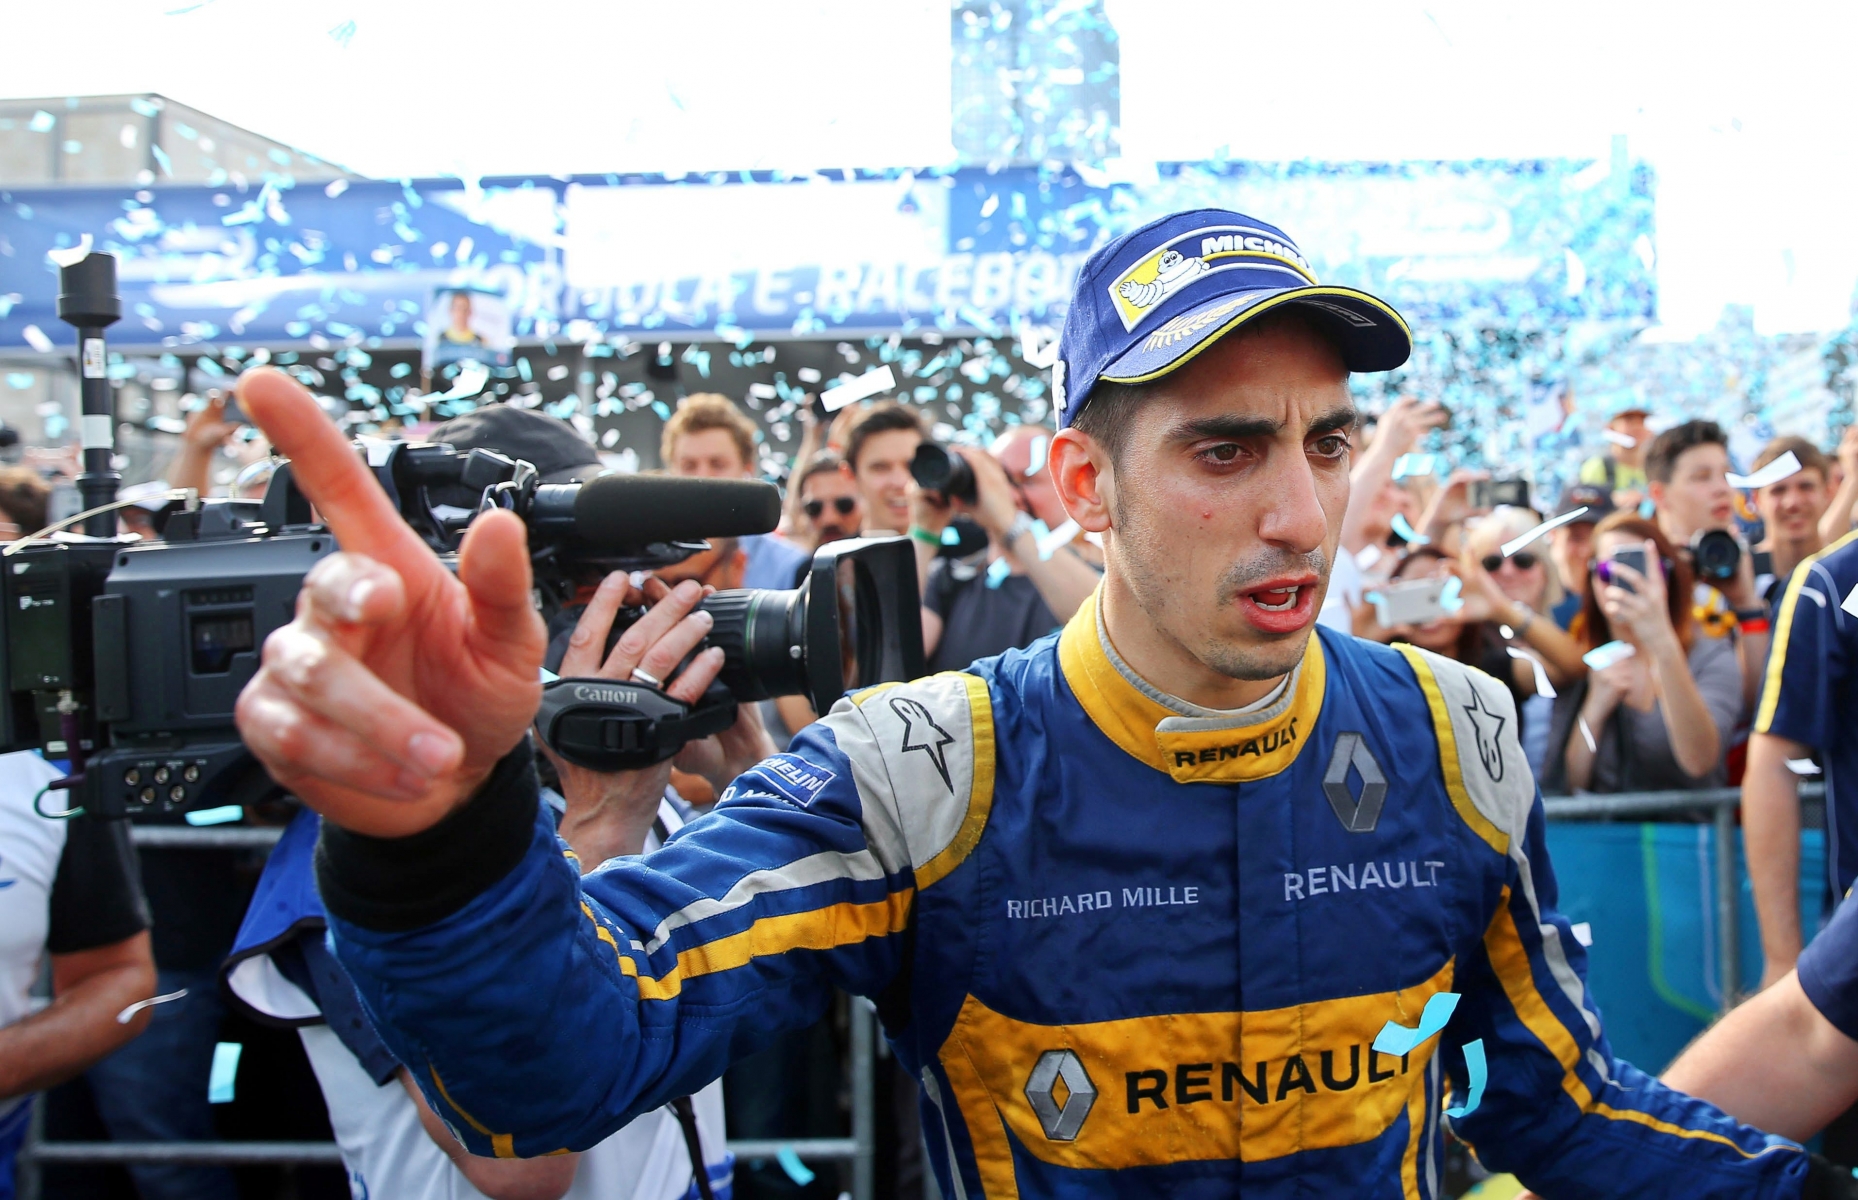 epa05321680 Swiss driver Sebastien Buemi of Team Renault e.dams celebrates after winning the FIA Formula E Berlin ePrix race in Berlin, Germany, 21 May 2016. The Formula E championship is the first all-electric racing series in the world and was inaugurated in September 2014. Ten teams with a total of 20 drivers take part in ten races around the world.  EPA/JENS BUETTNER GERMANY MOTOR RACING FORMULA E